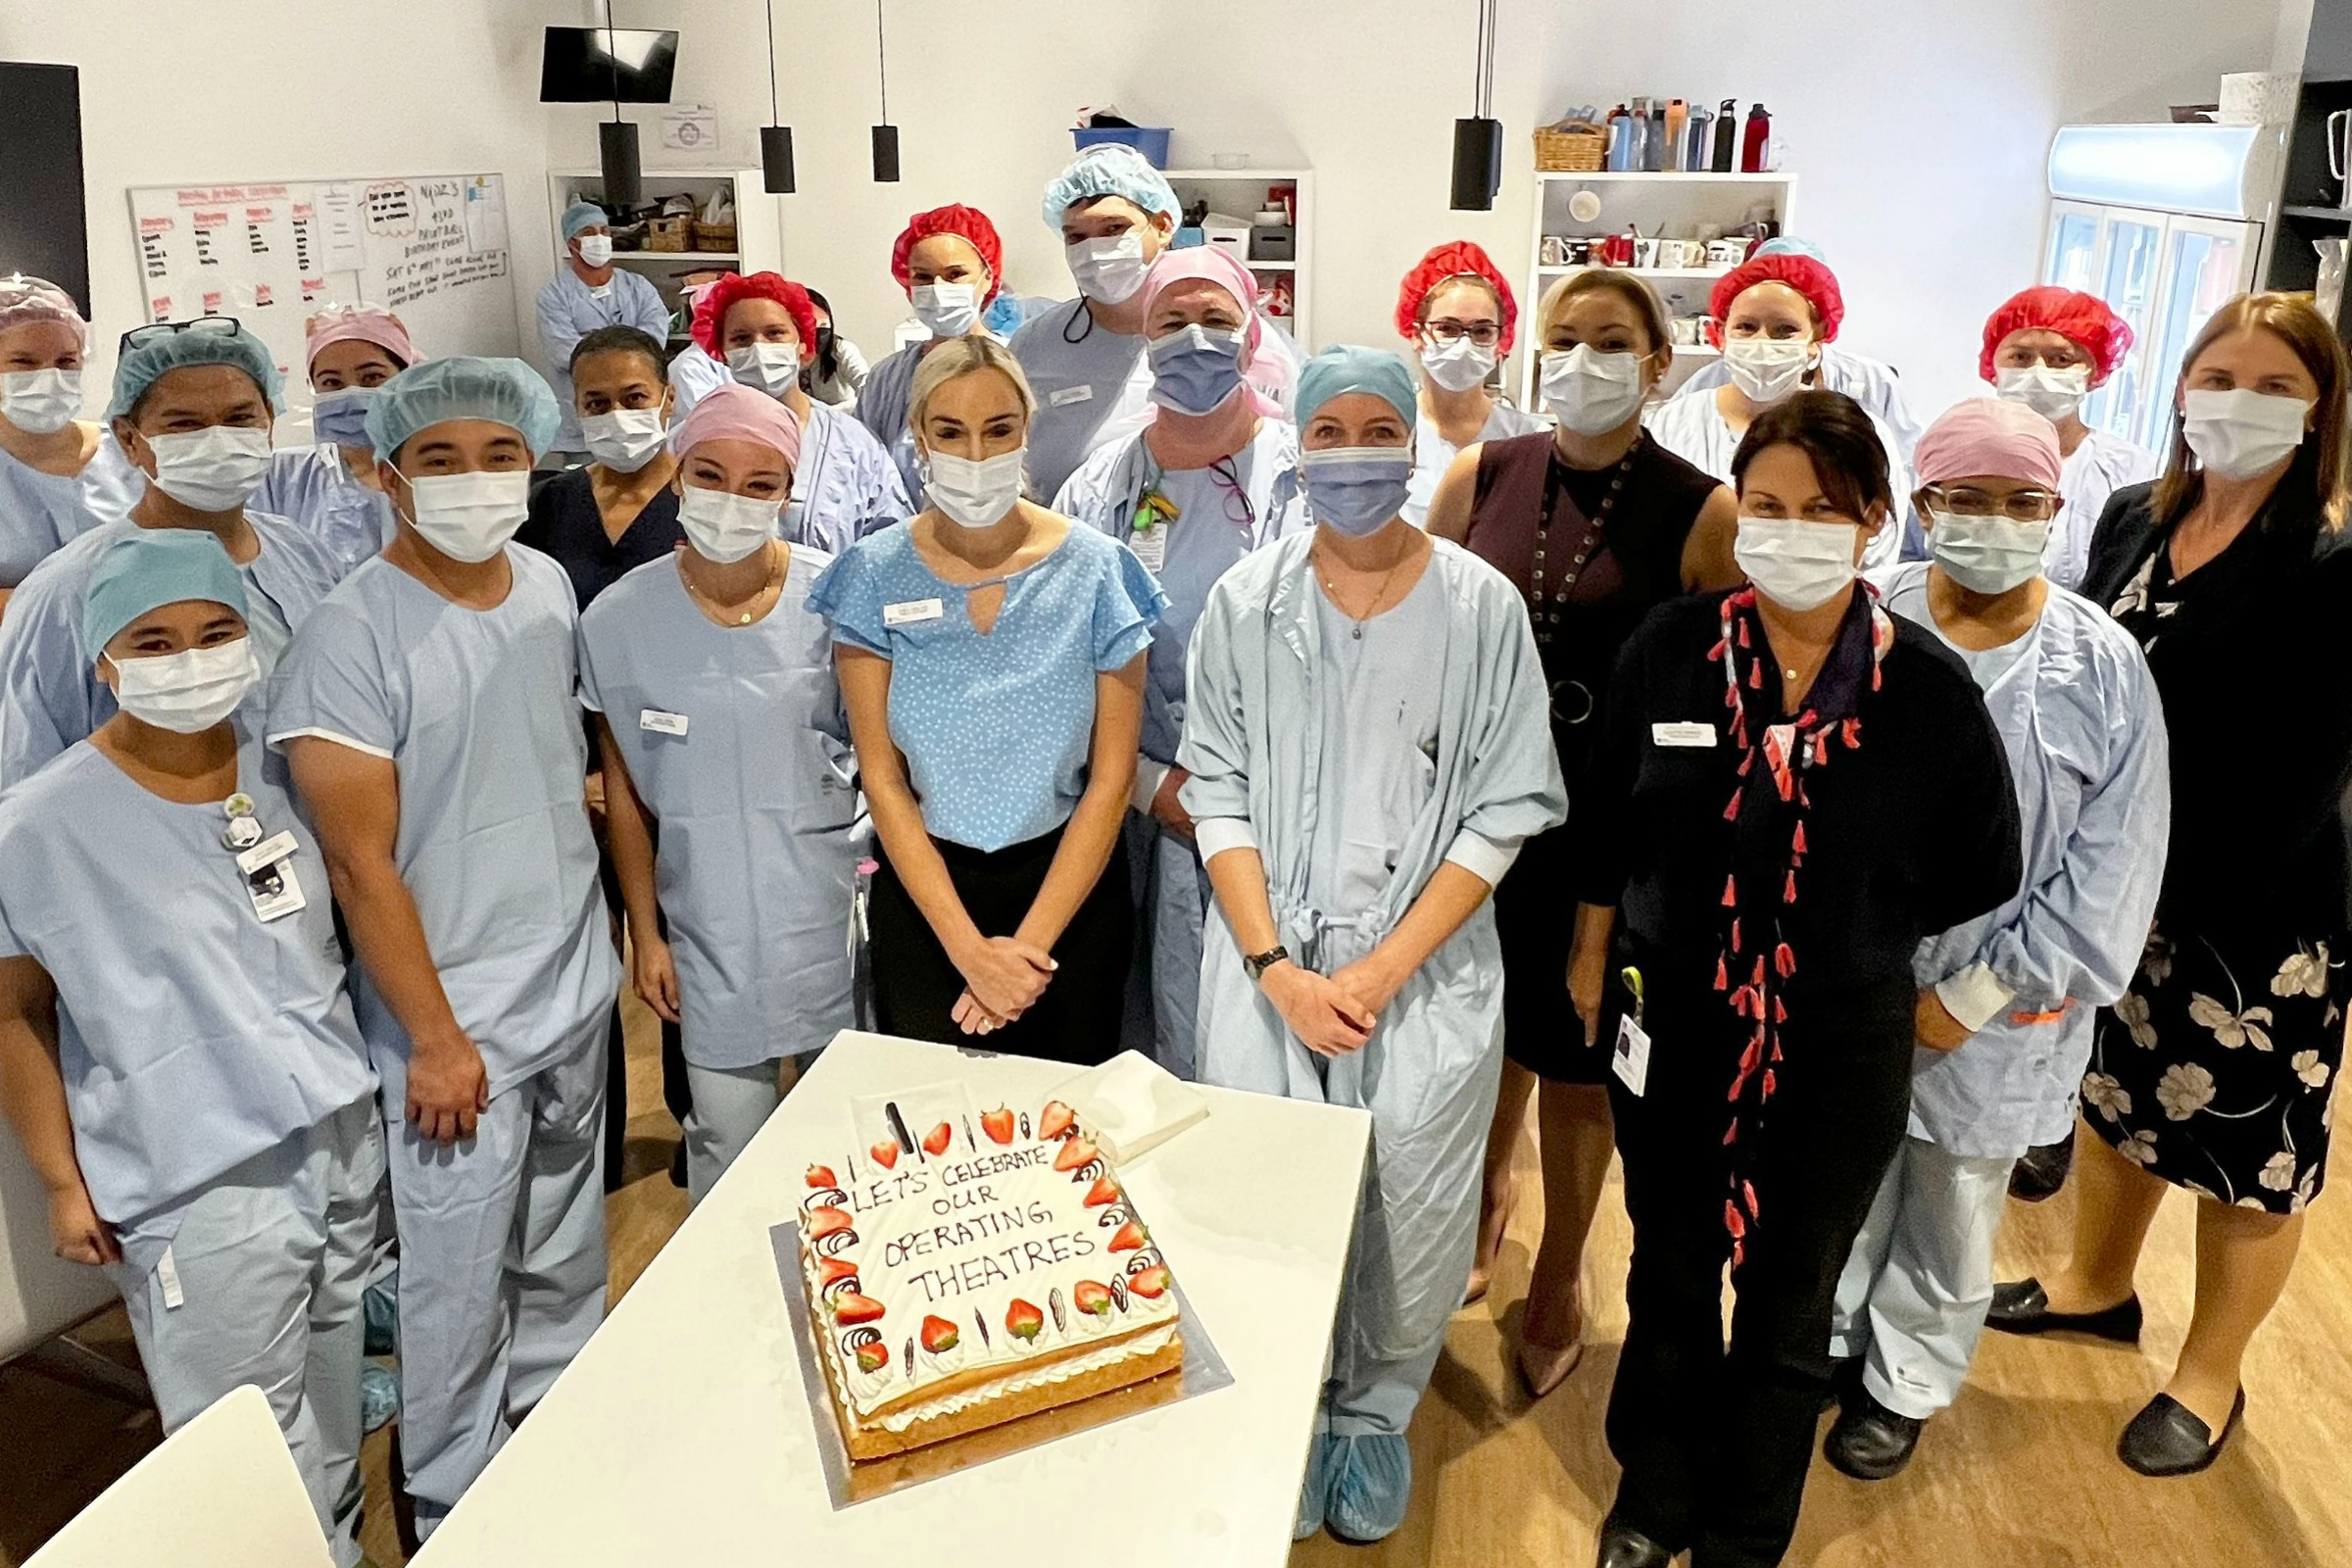 Staff from the operating theaters and post-anaesthetic care unit celebrate the opening of the new area with cake